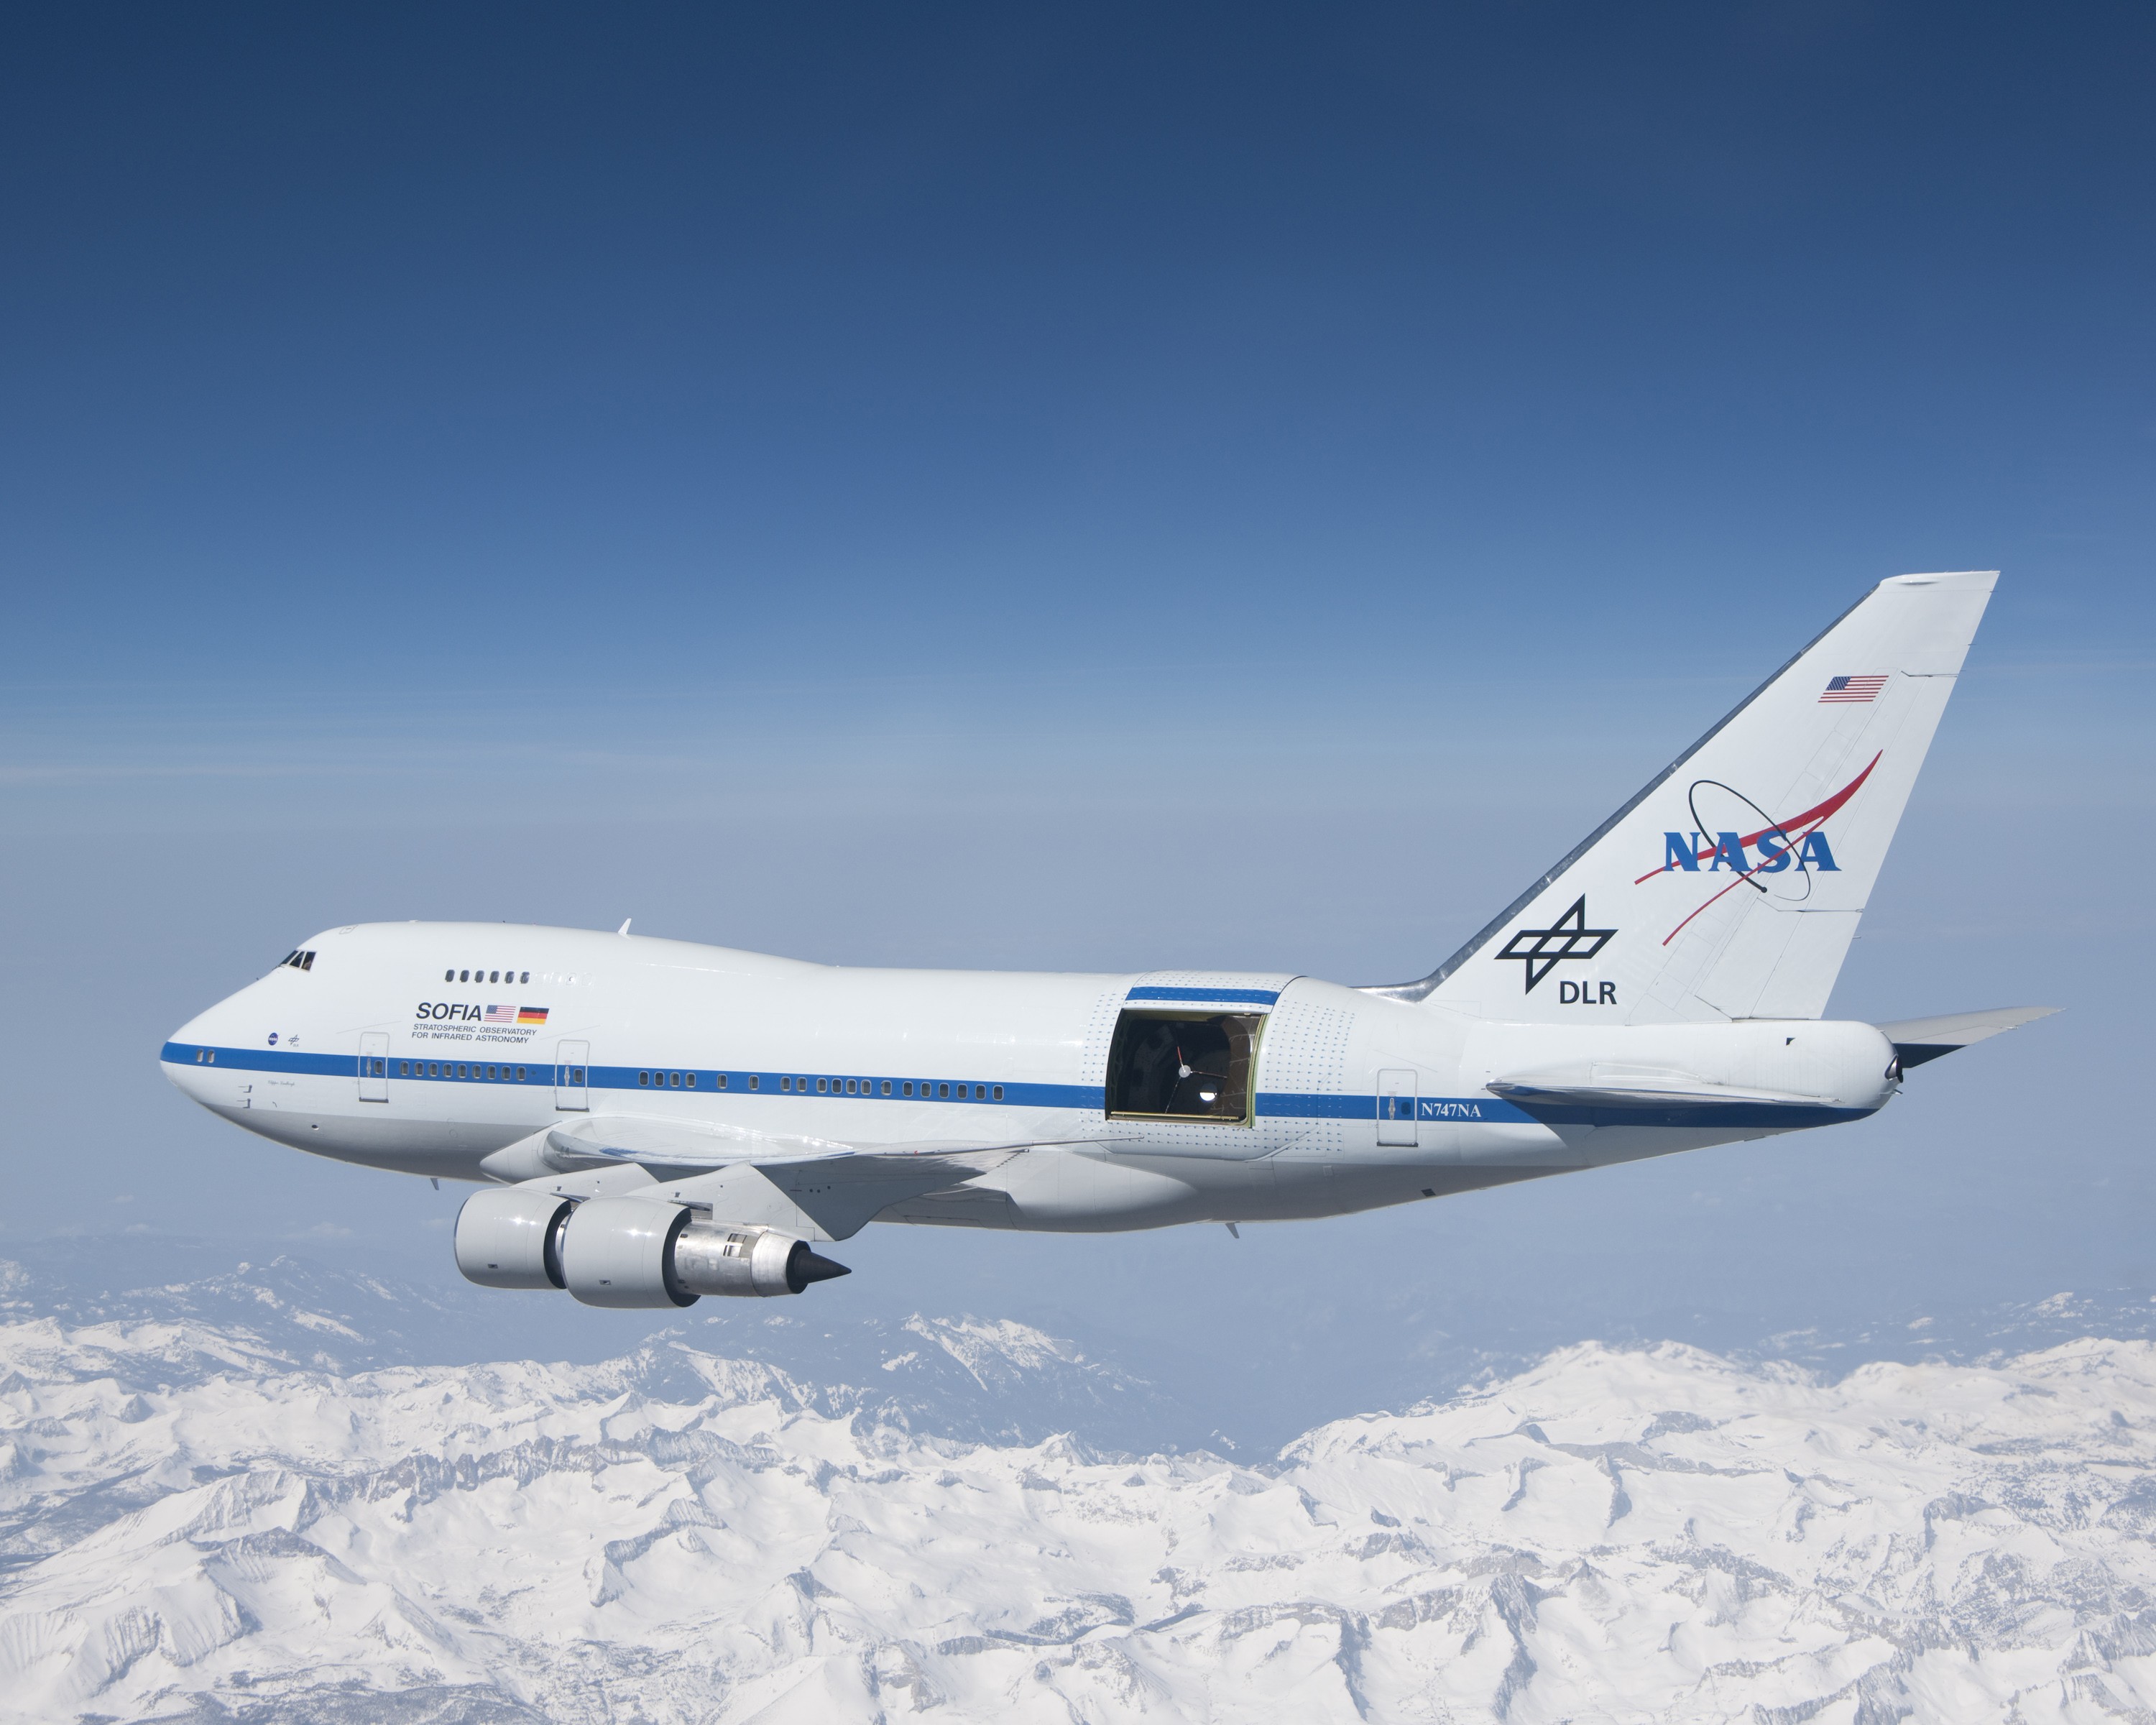 General 3000x2400 airplane passenger aircraft aircraft vehicle NASA telescope Boeing 747 observatory Research American aircraft Boeing sky snow snow covered mountains side view flying